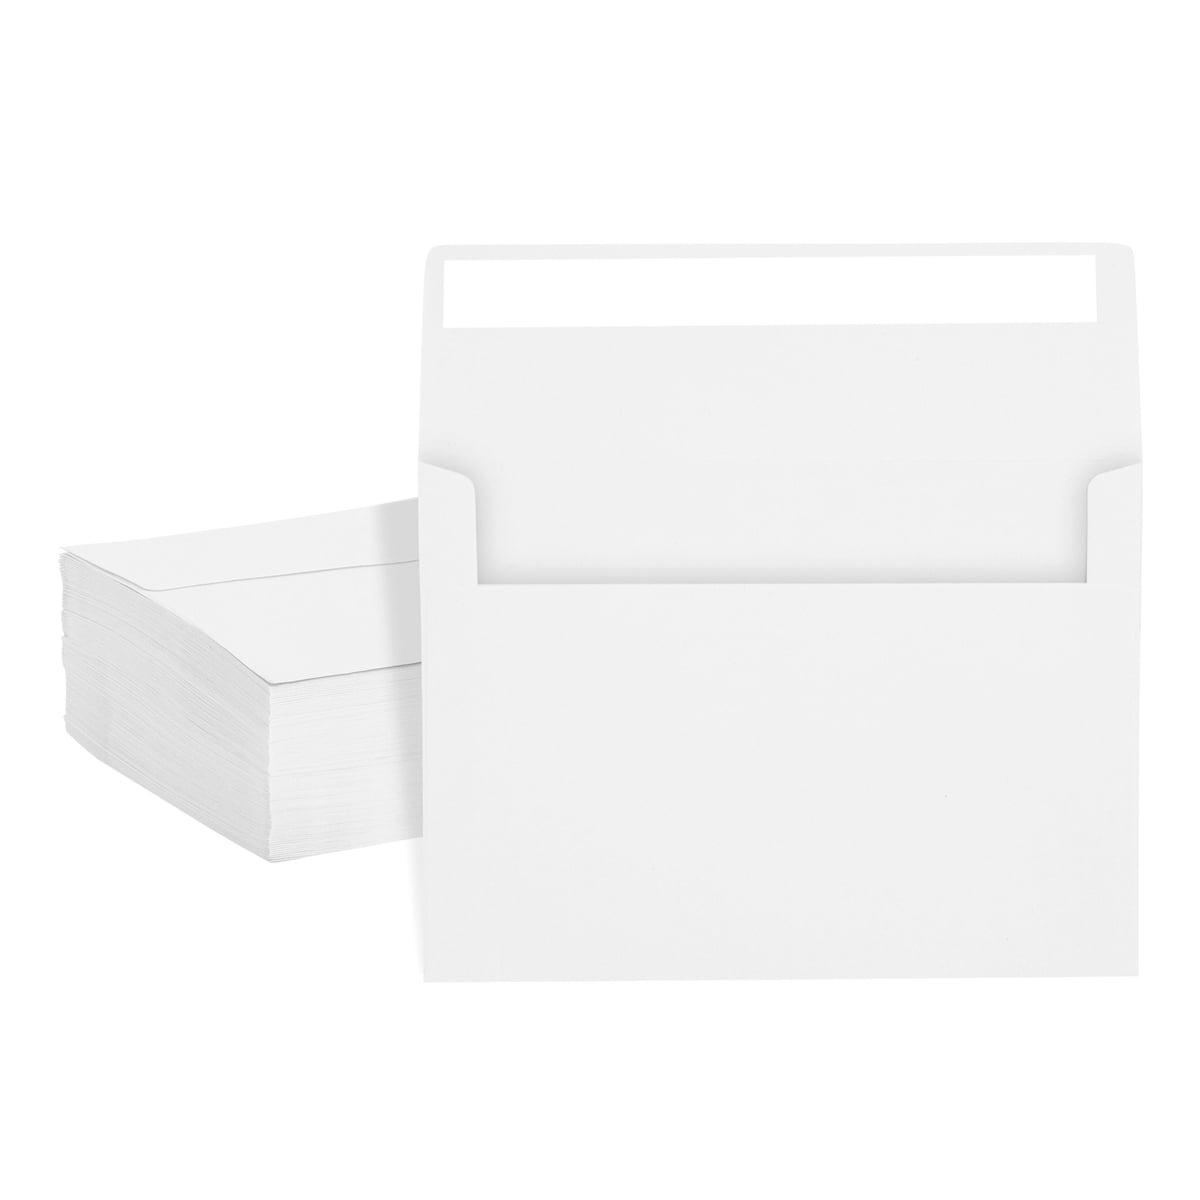 Office Depot Brand Greeting Card Envelopes A7 5 14 x 7 14 Clean